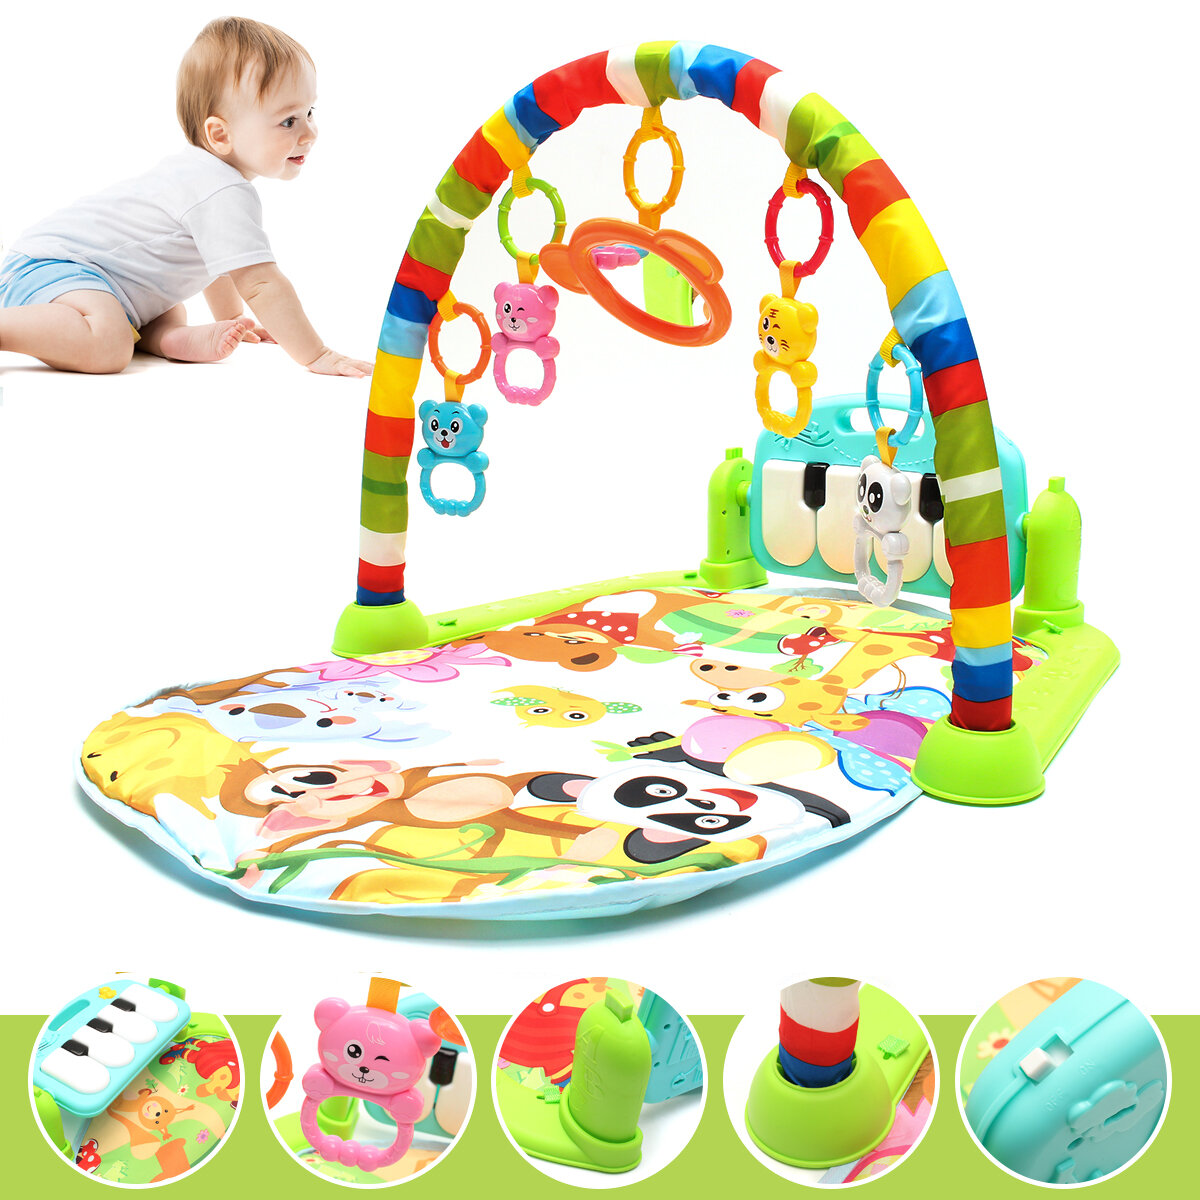 

Infant Mat Kids Rug Educational Puzzle Carpet With Piano Keyboard And Cute Animal Mat Toddler Gym Crawling Activity Mat